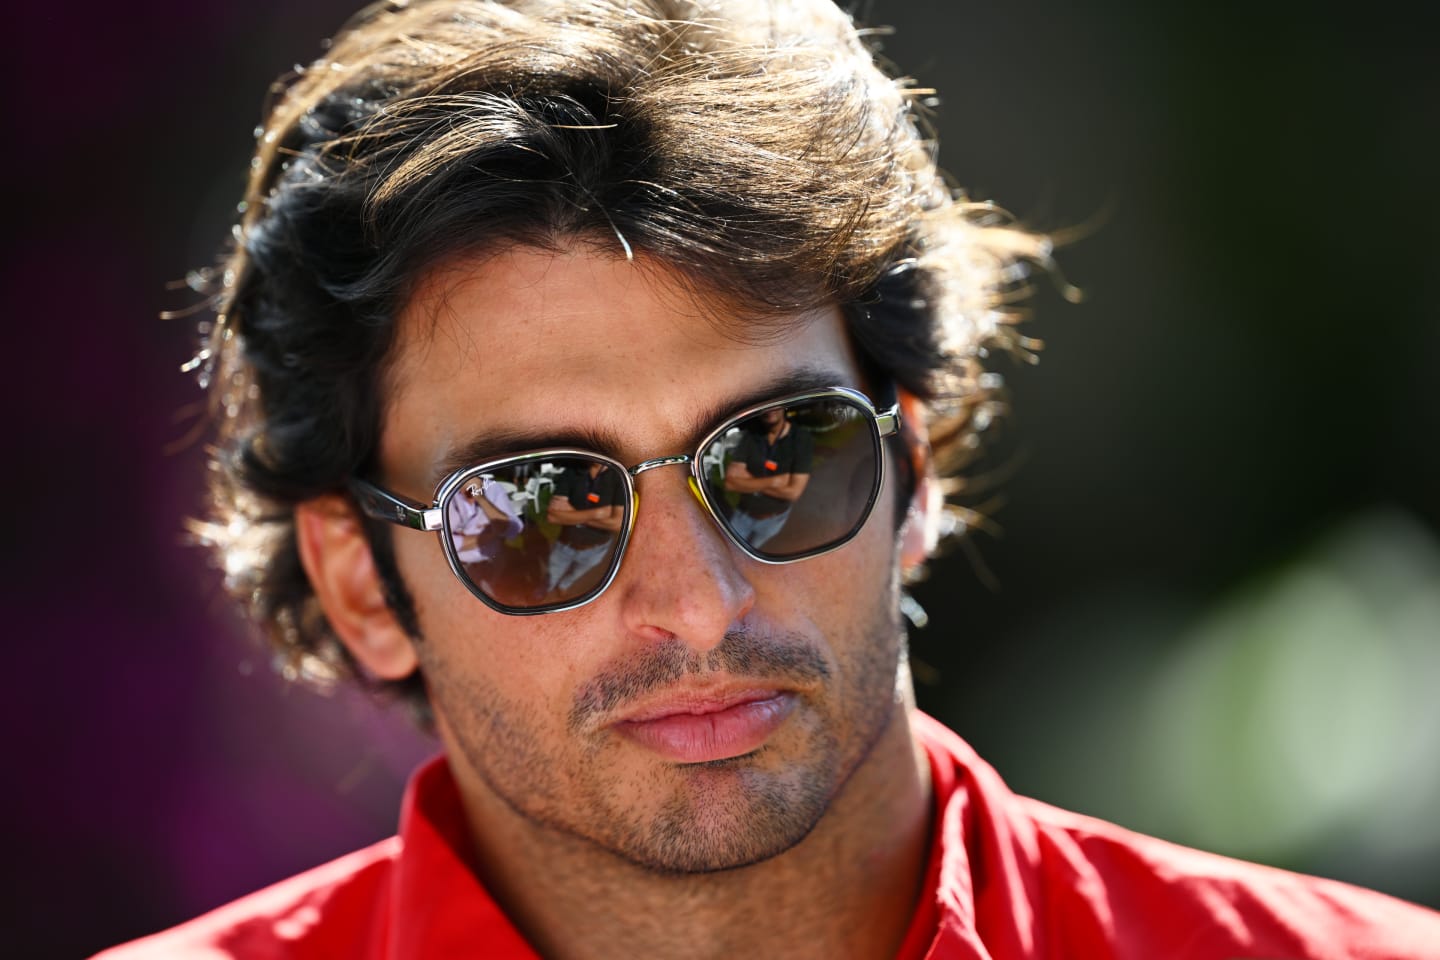 MELBOURNE, AUSTRALIA - APRIL 08: Carlos Sainz of Spain and Ferrari looks on in the Paddock prior to practice ahead of the F1 Grand Prix of Australia at Melbourne Grand Prix Circuit on April 08, 2022 in Melbourne, Australia. (Photo by Clive Mason/Getty Images)